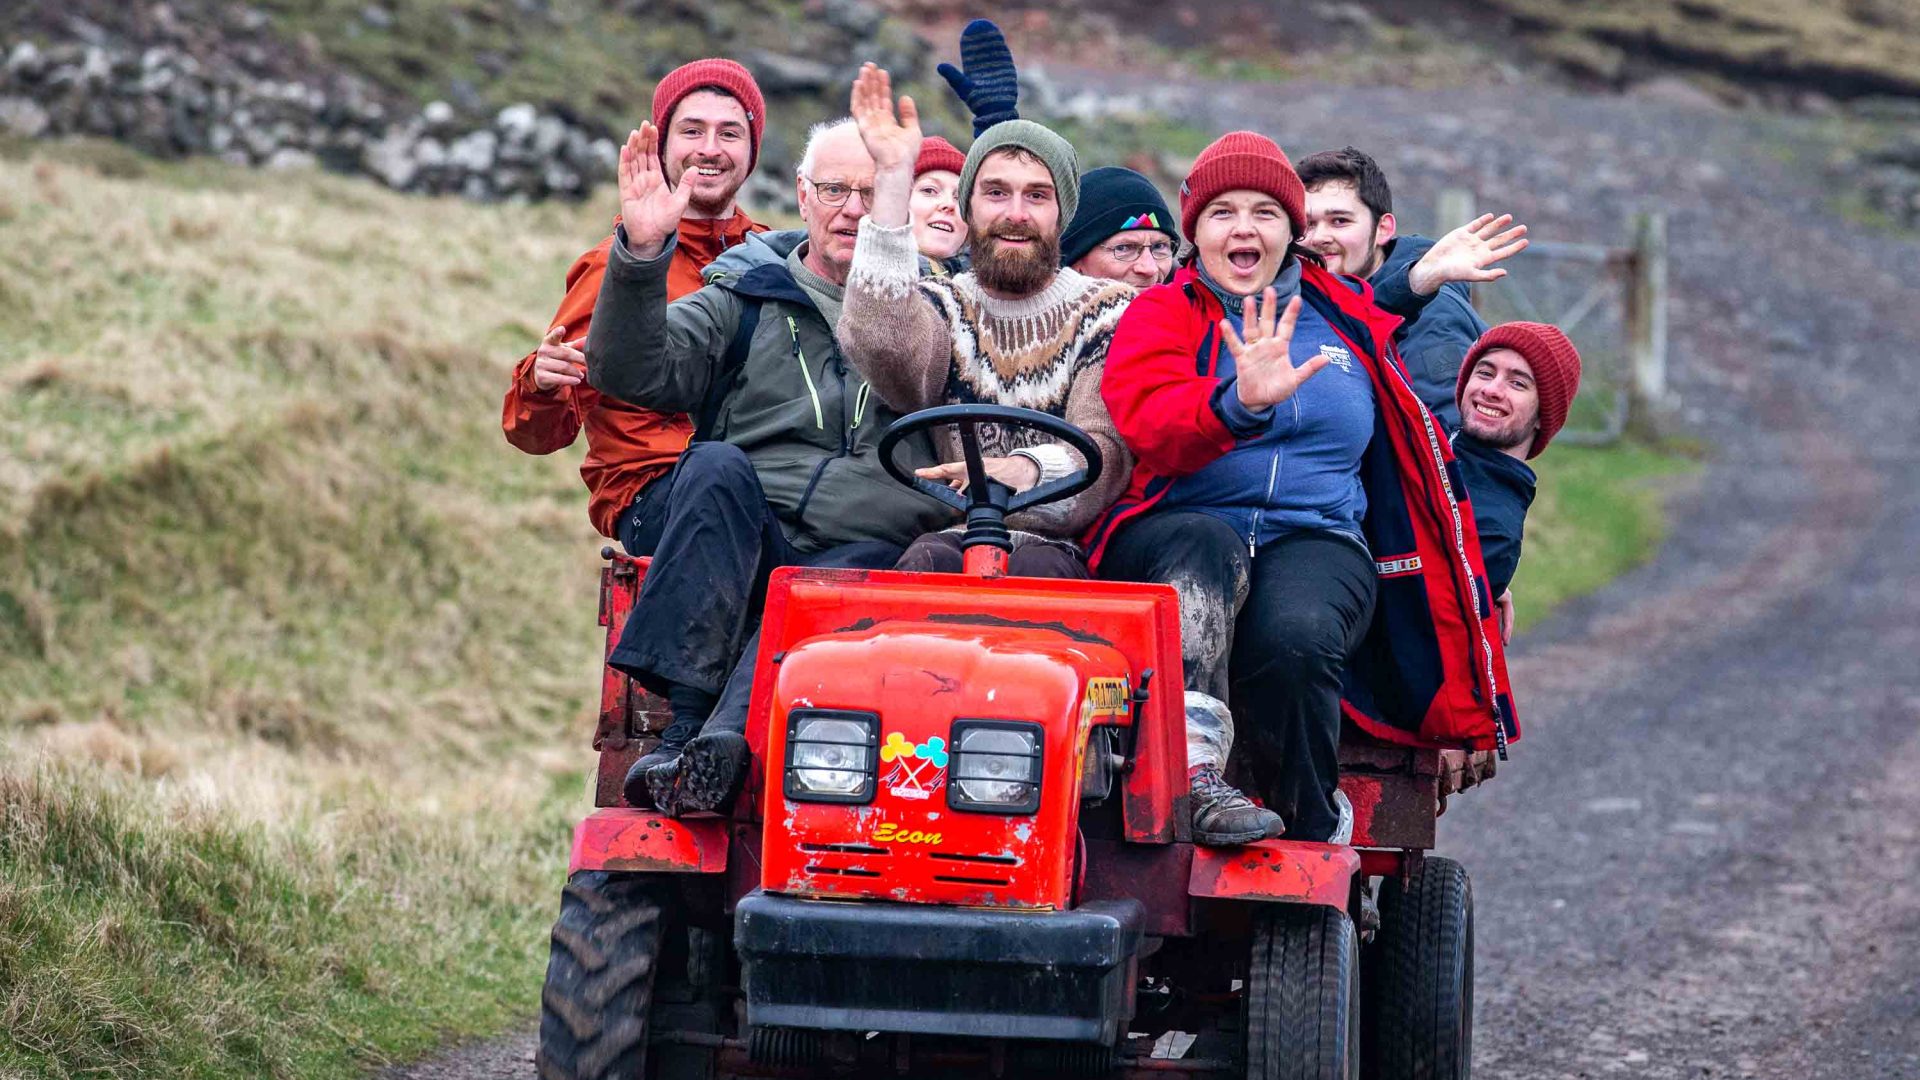 A group of happy volunteers on a small quad bike.